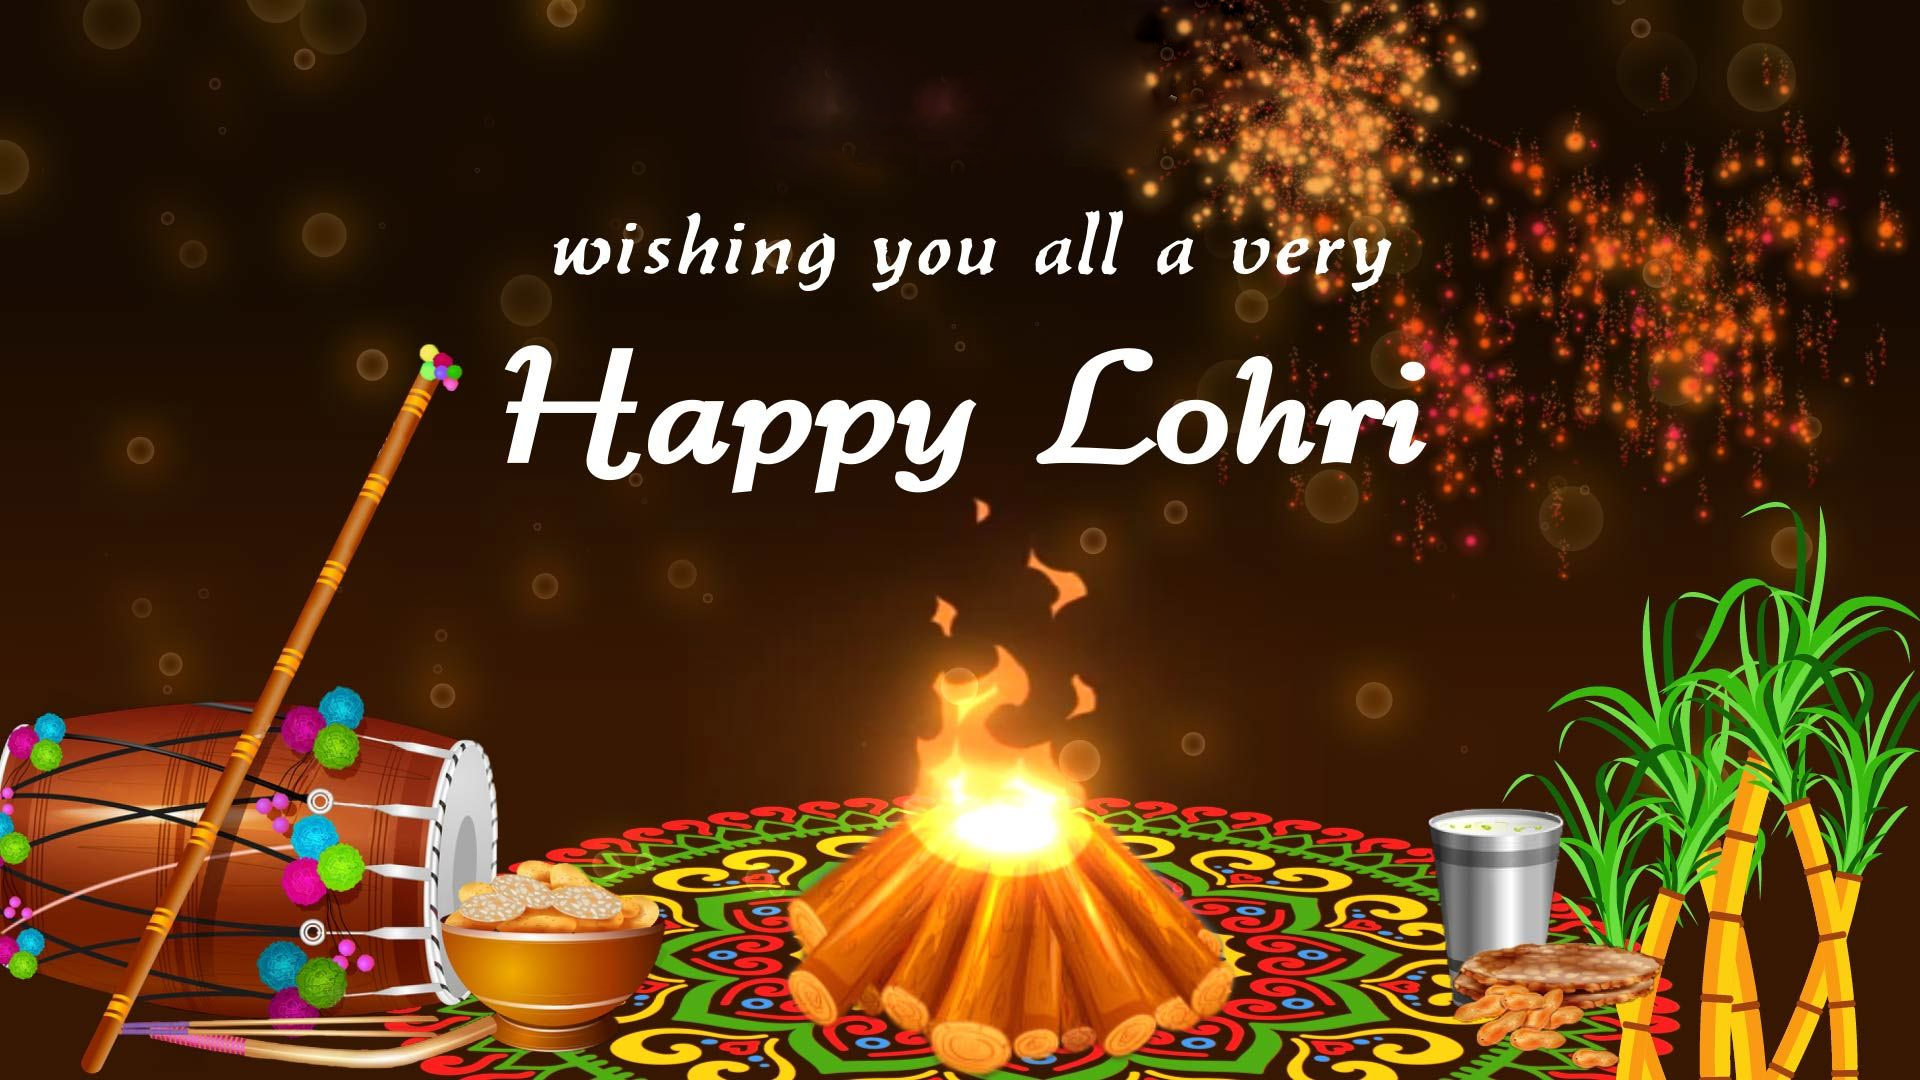 Happy Lohri Wishes Hd Wallpapers Download | Festivals